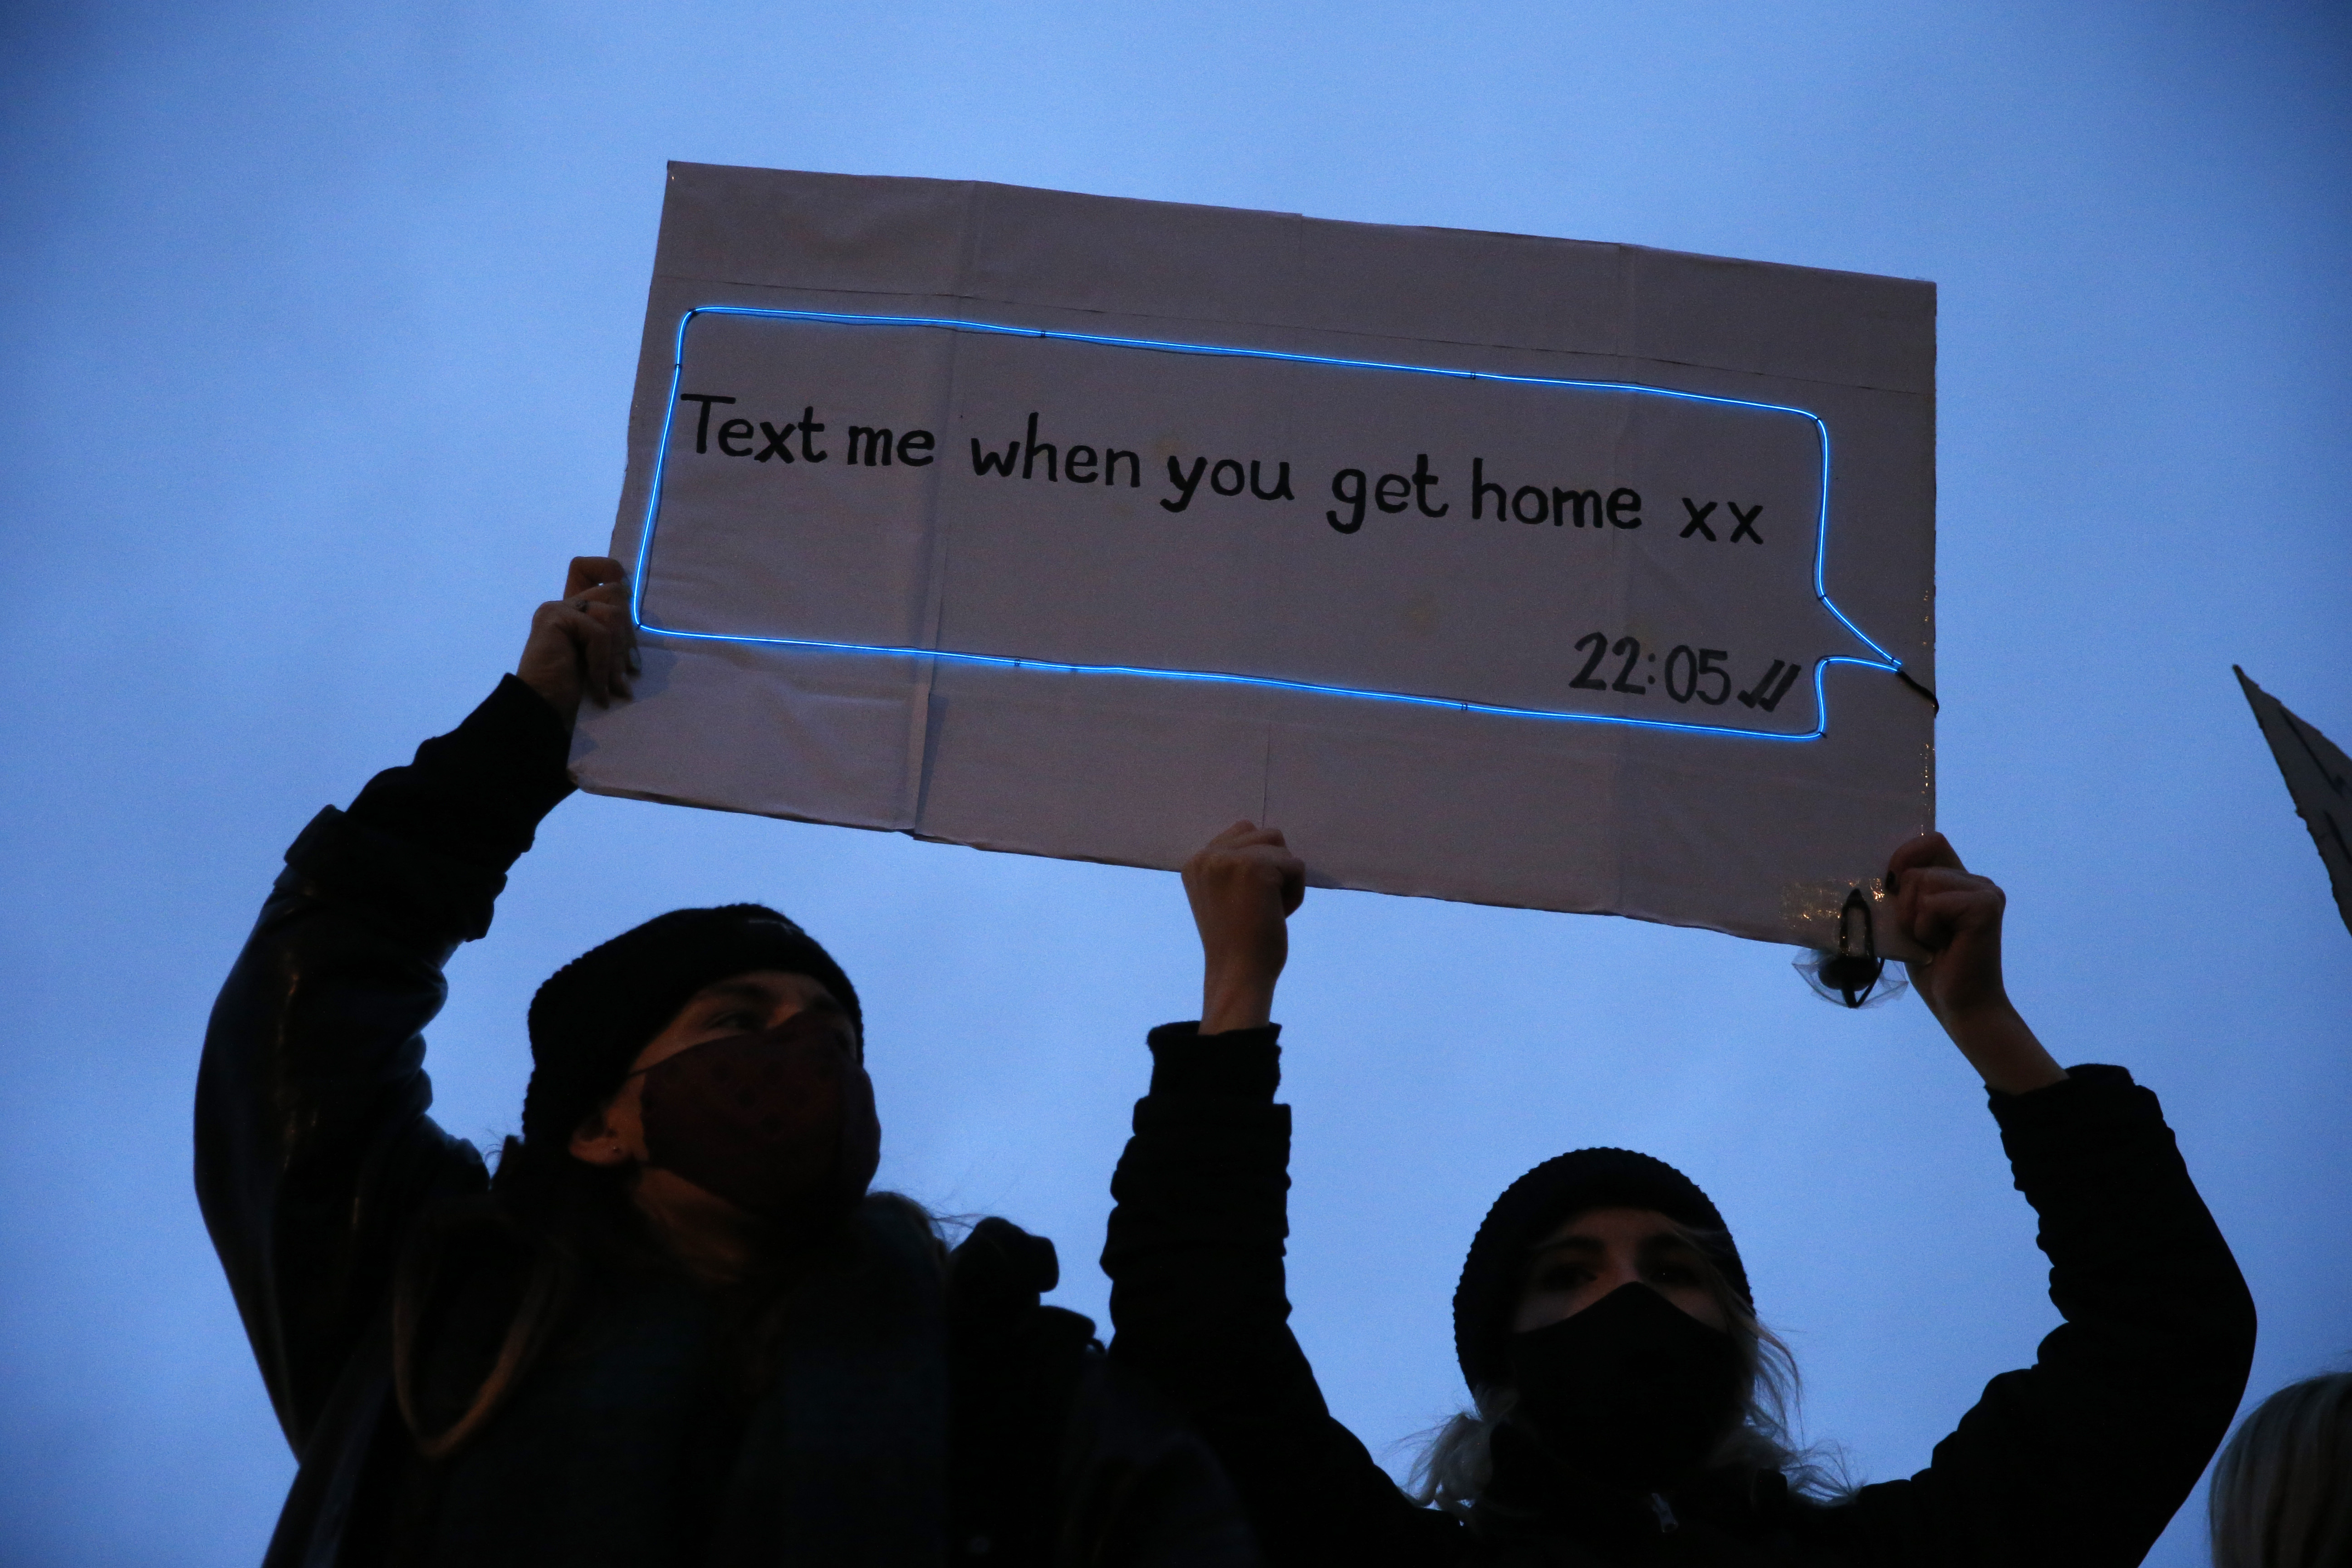 Members of the public hold up a sign reading ''Text me when you get home xx 22:05'' during a protest criticising the actions of the police at last night's vigil photo.